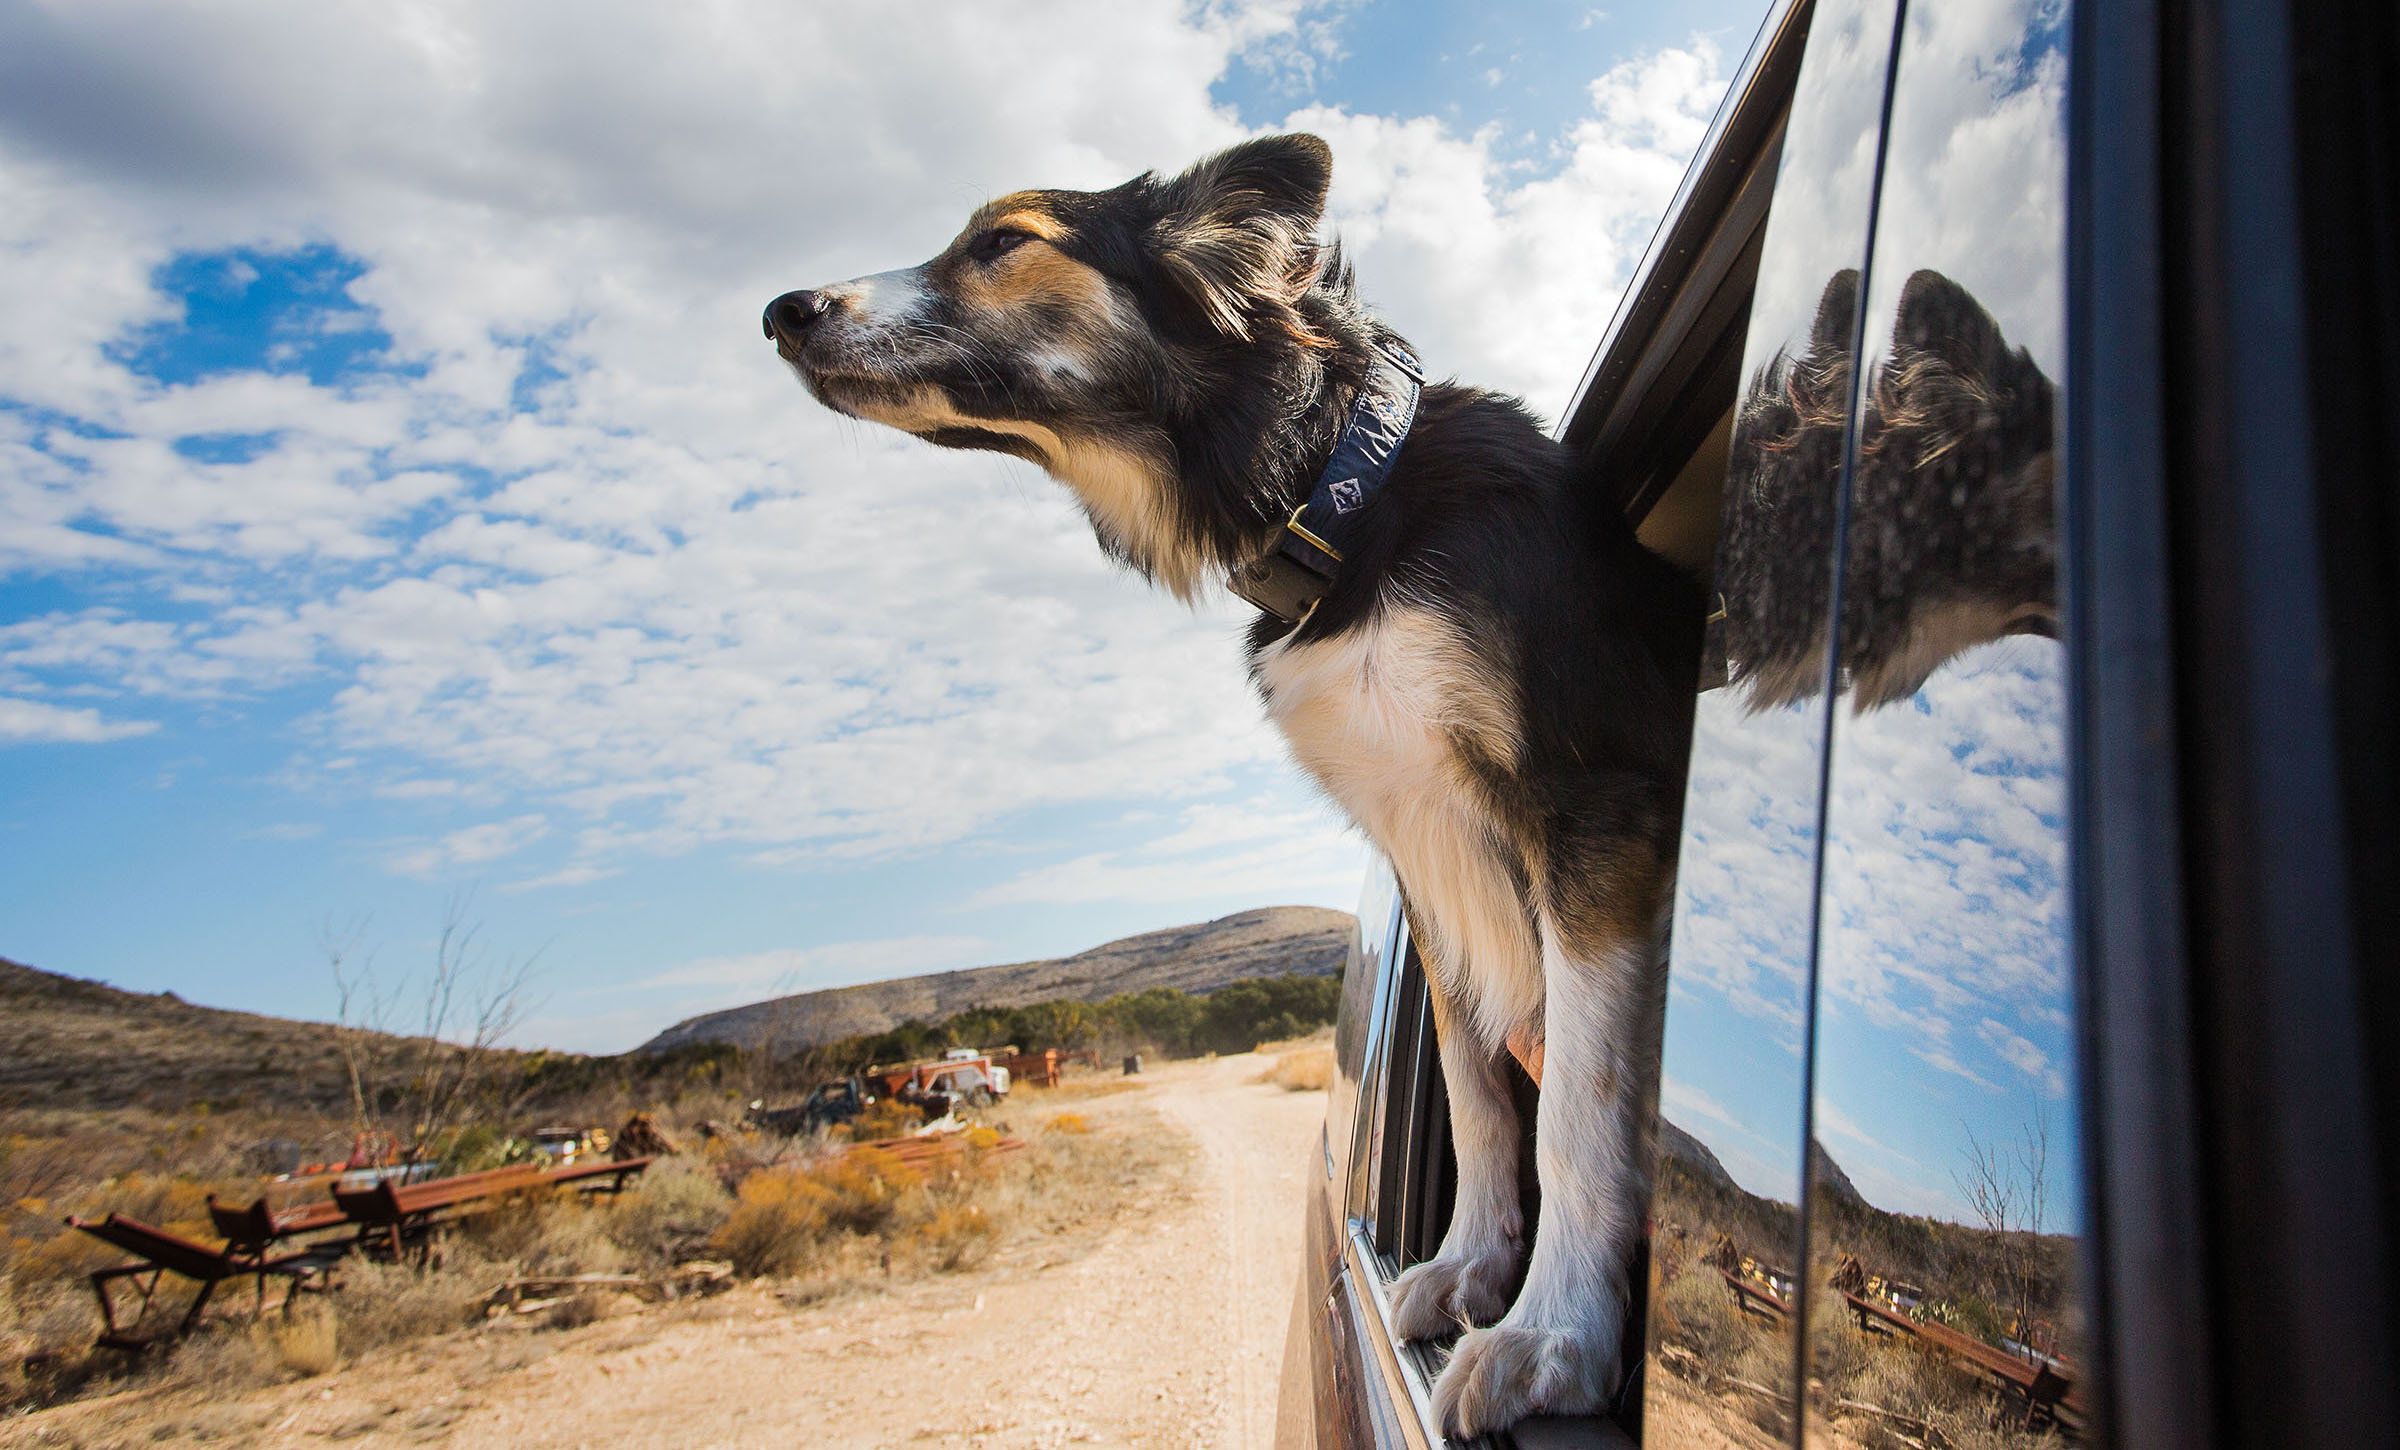 A border collie looks out at the landscape underneath a blue sky